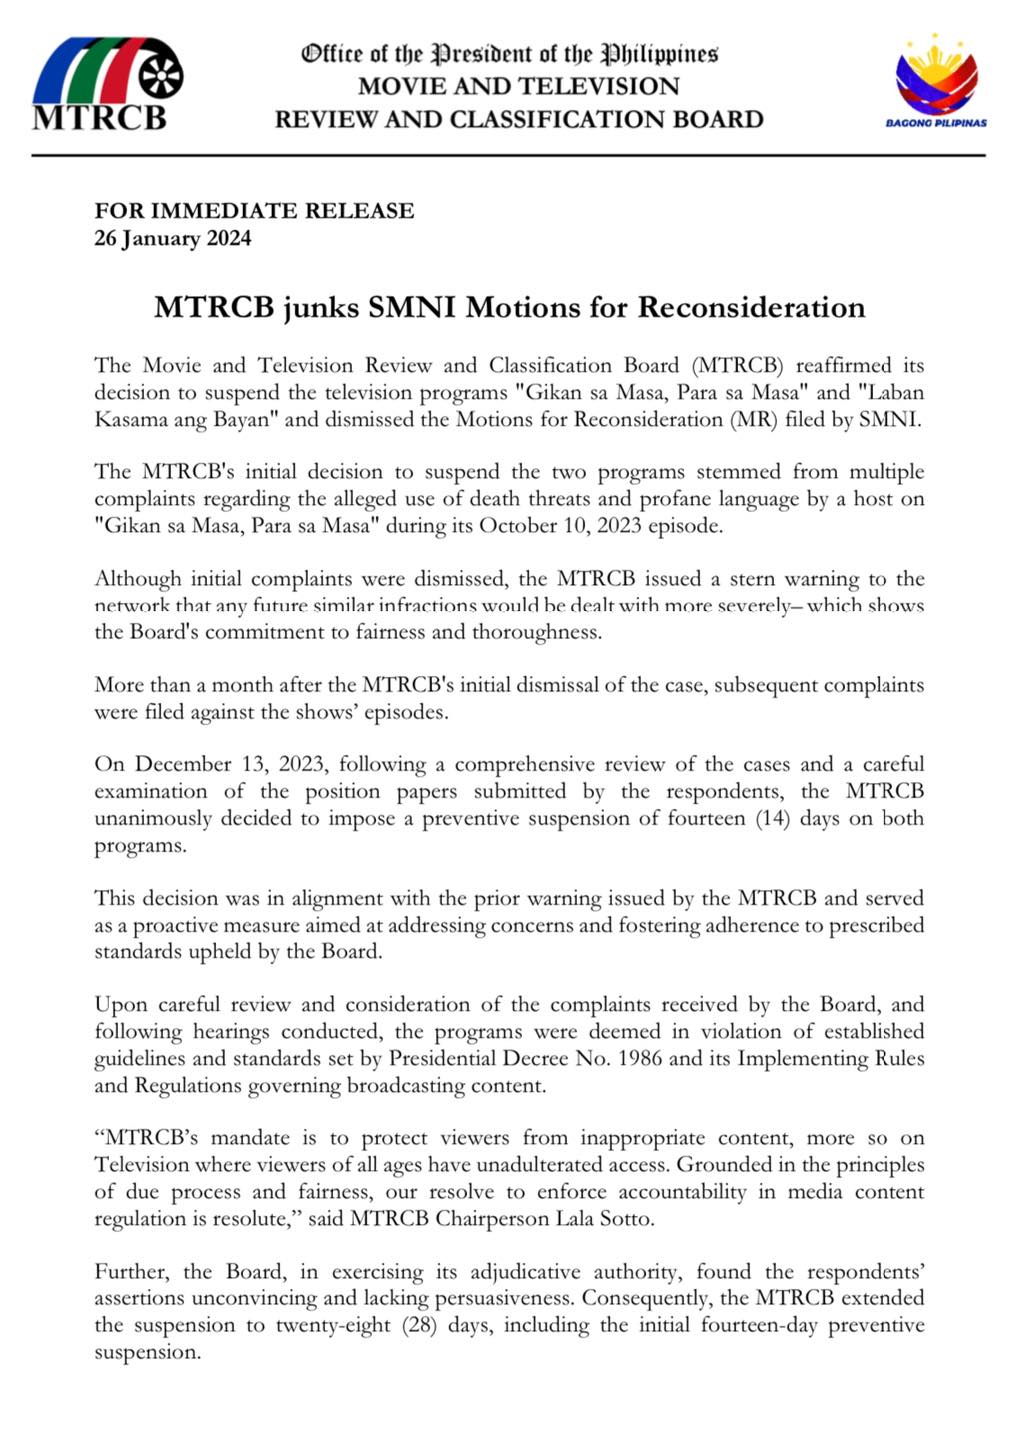 mtrcb denies smni's motion for reconsideration, extends suspension of 2 shows